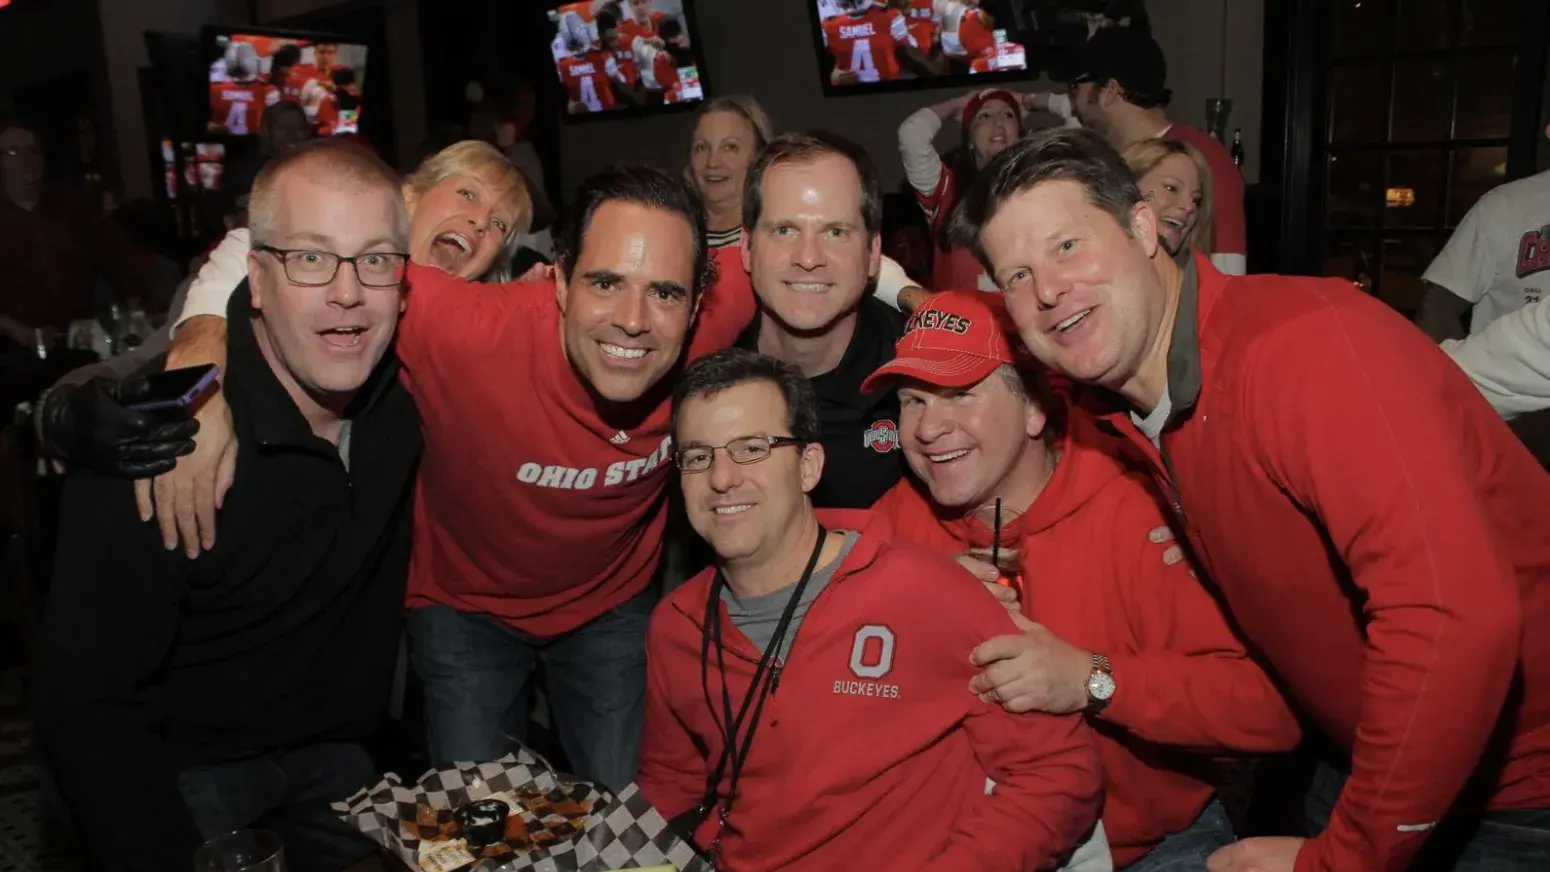 a group of alumni wearing ohio state gear pose for a group shot at a bar during an ohio state football game